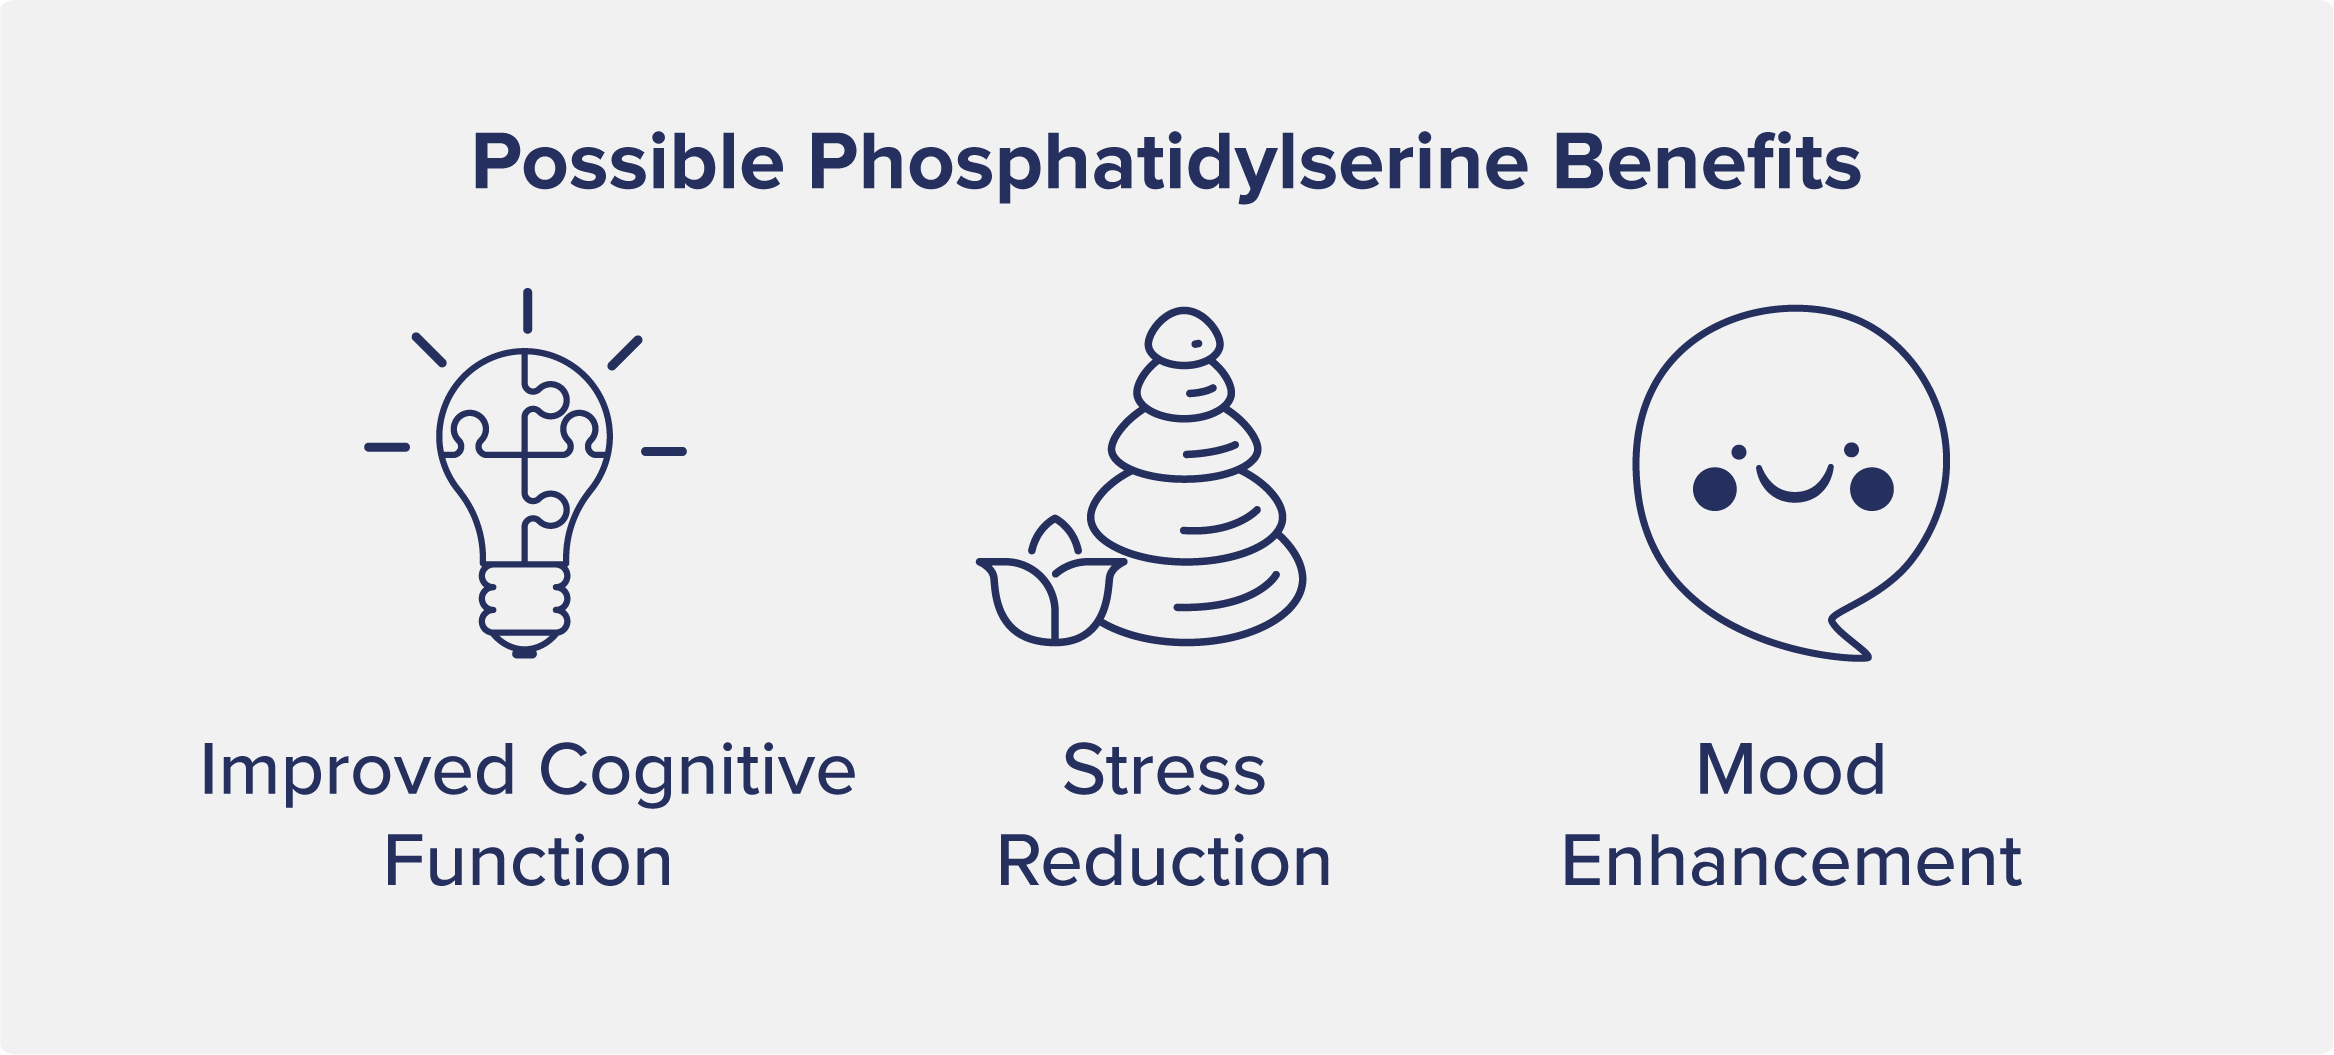 A graphic entitled "Possible Phosphatidylserine Benefits," listing "improved cognitive function," "stress reduction," and "mood enhancement" as the benefits.